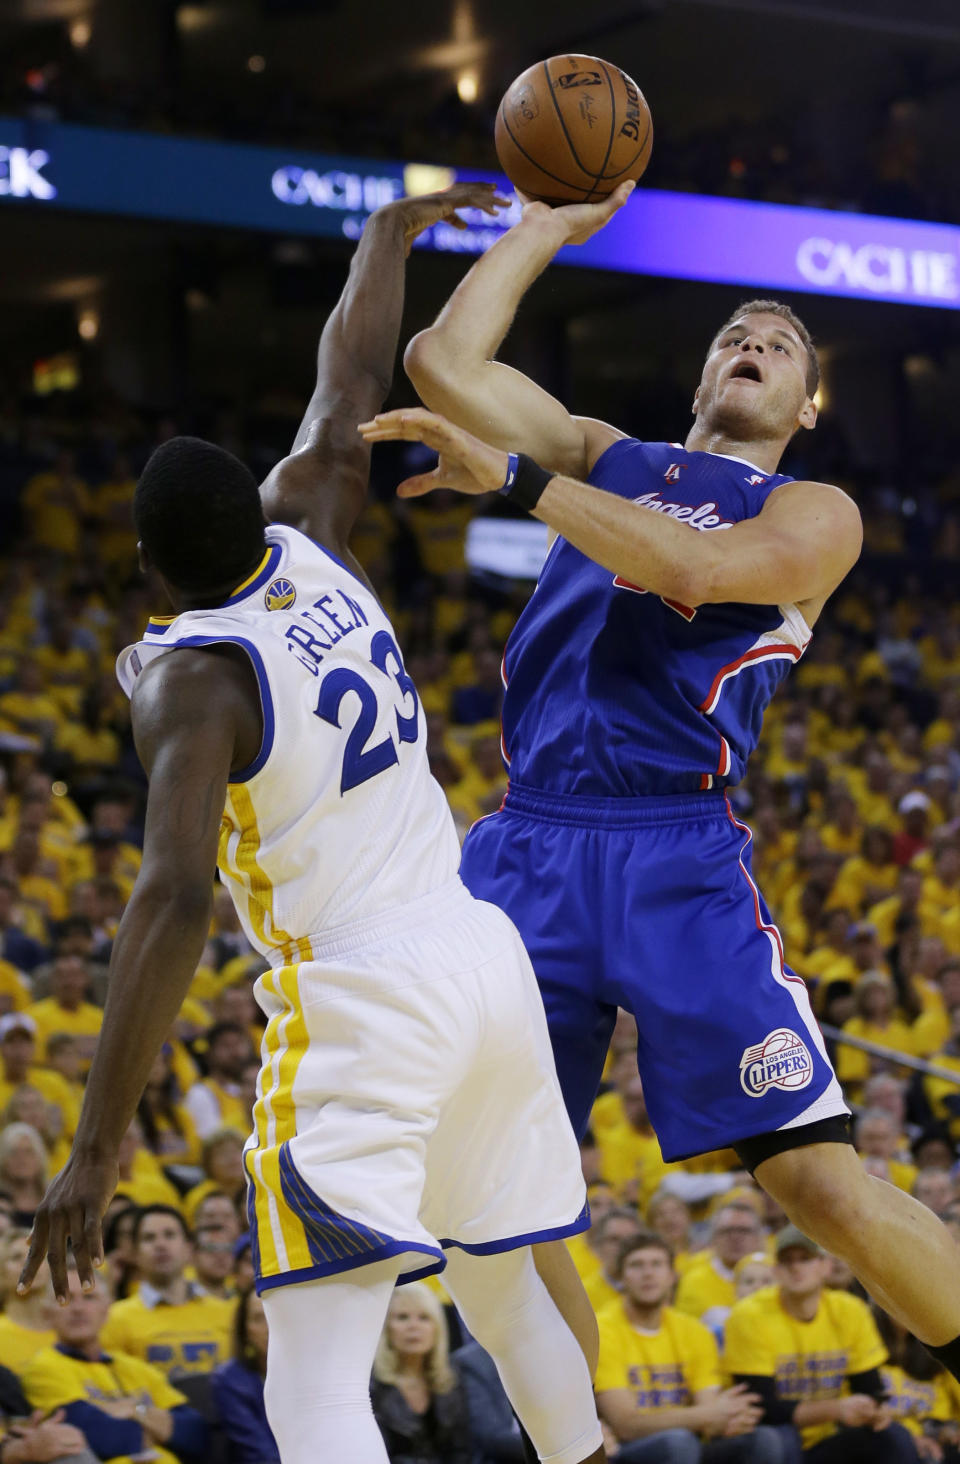 Los Angeles Clippers' Blake Griffin, right, goes up for a shot next to Golden State Warriors' Draymond Green during the first half in Game 4 of an opening-round NBA basketball playoff series on Sunday, April 27, 2014, in Oakland, Calif. (AP Photo/Marcio Jose Sanchez)